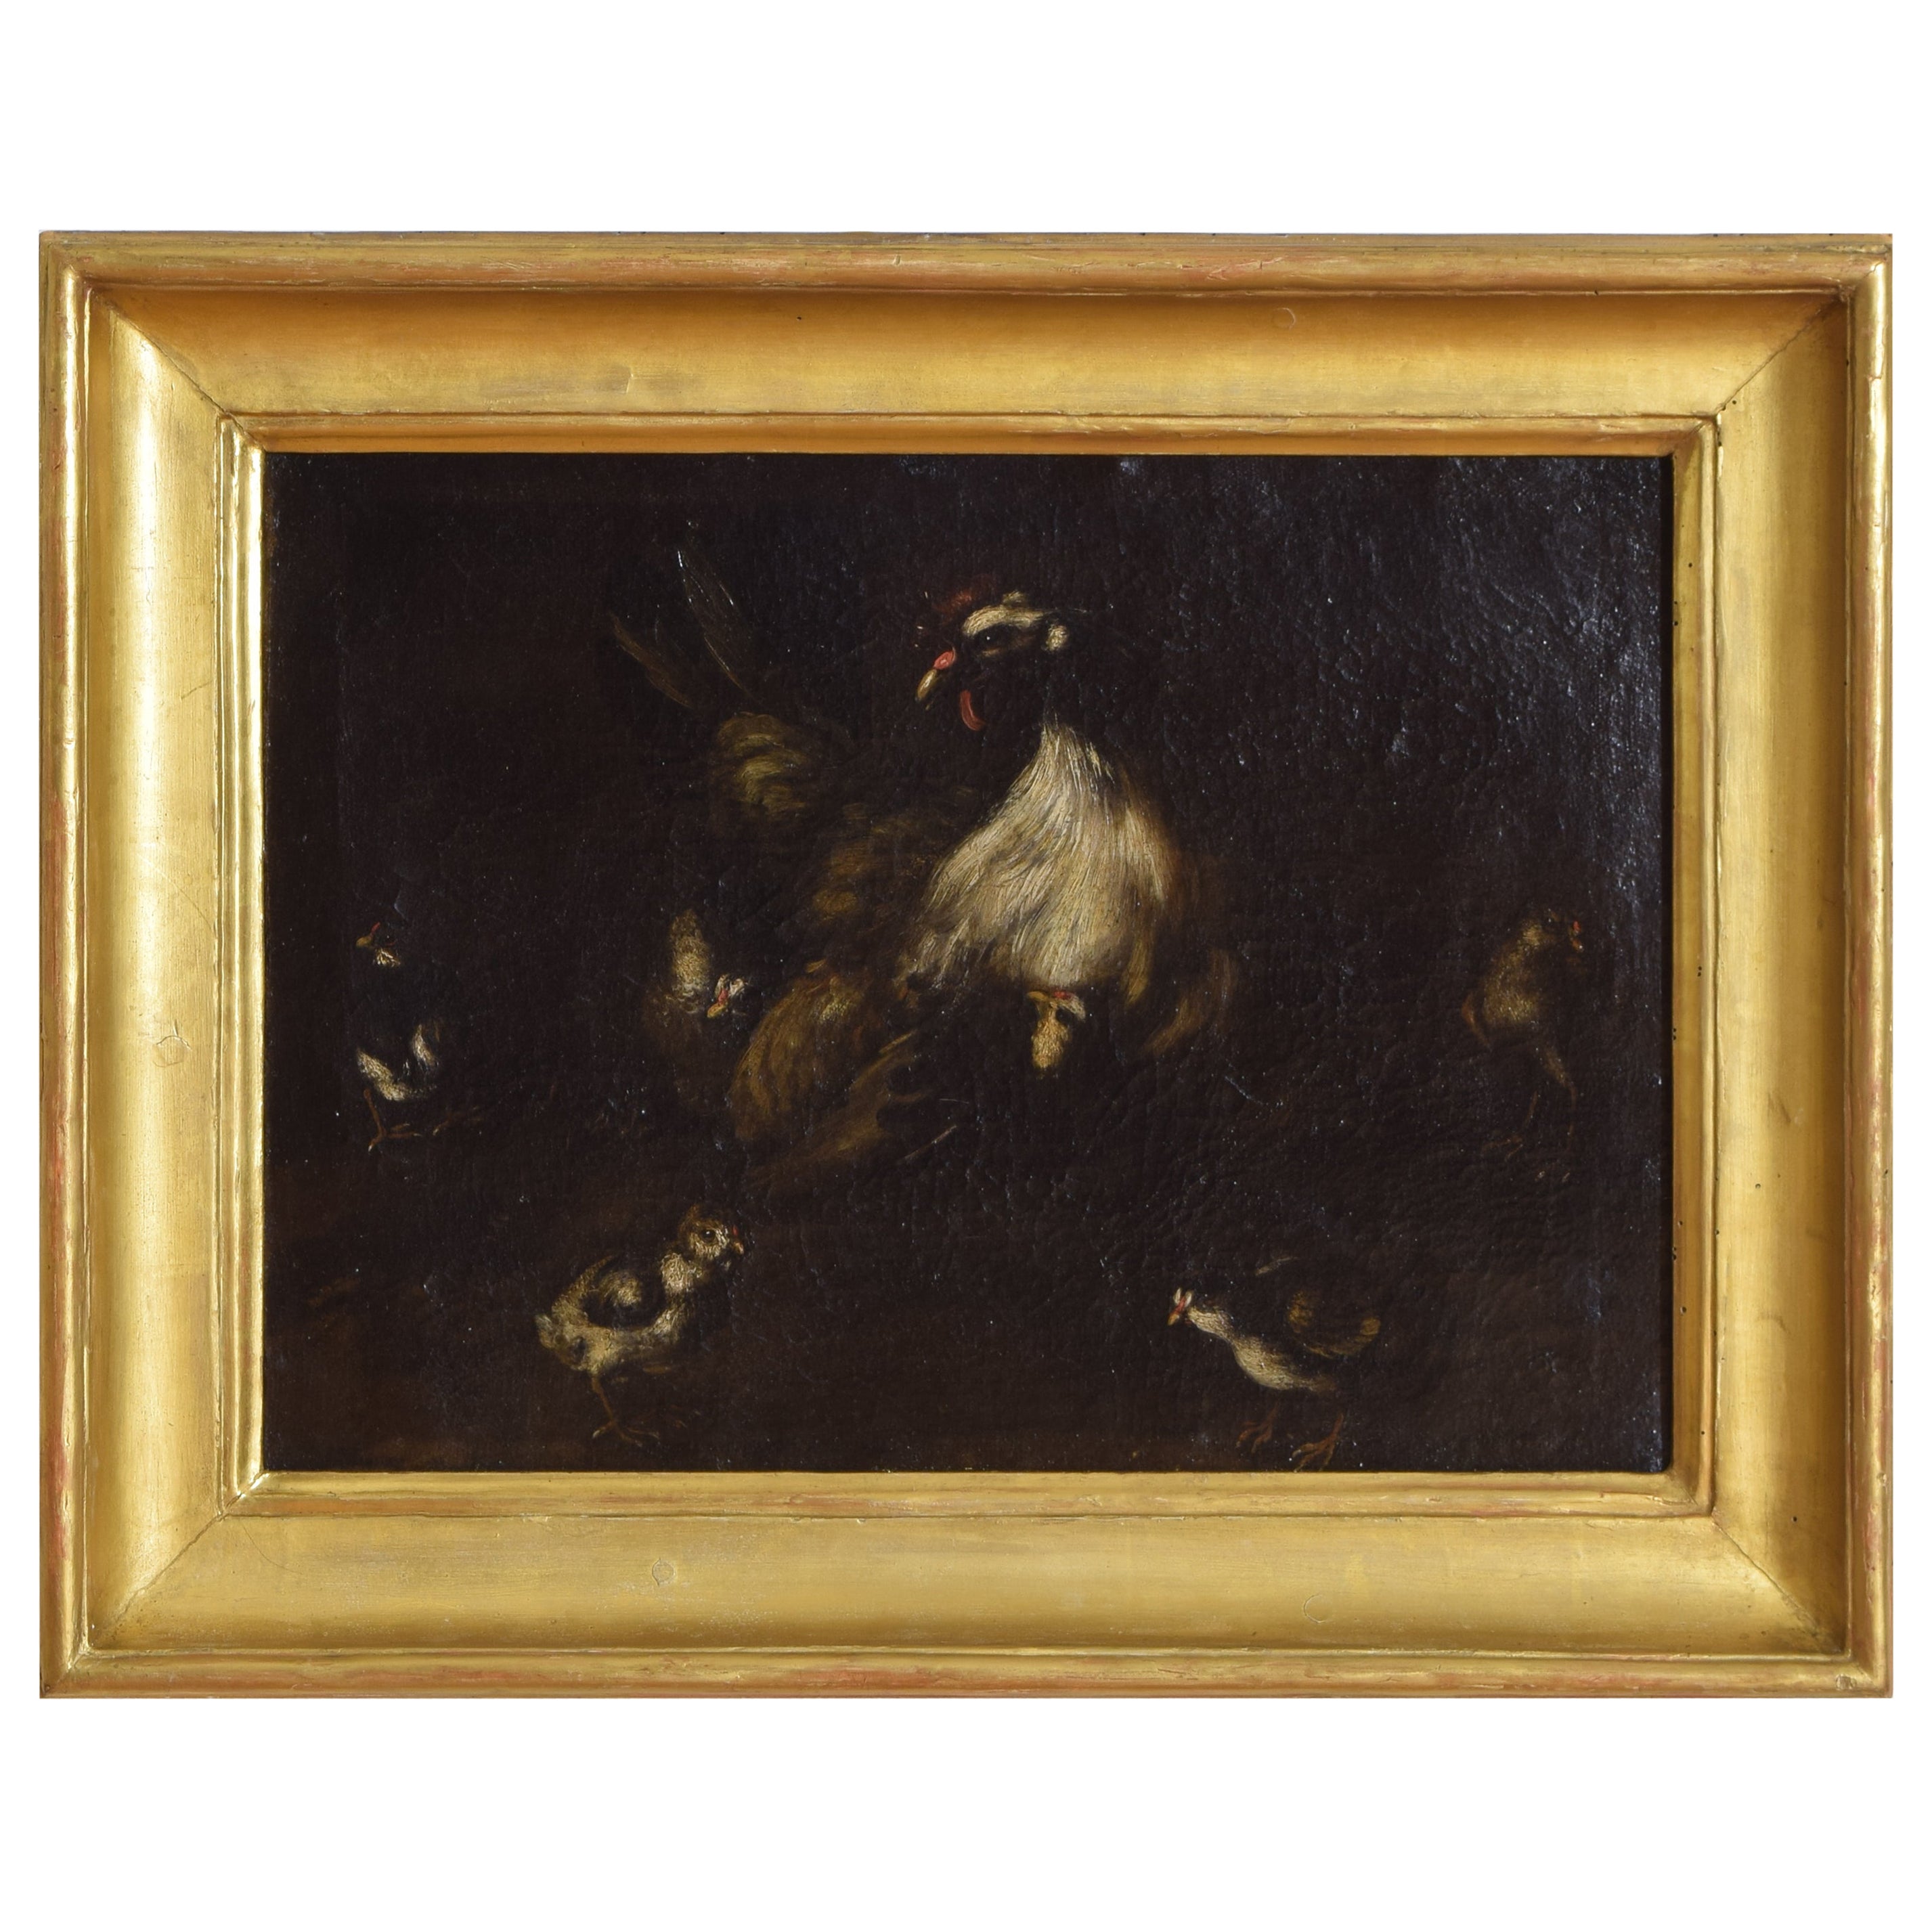 Oil on Canvas, Italy, Emilian School, Mother Hen with Chicks, Early 18th Cen.